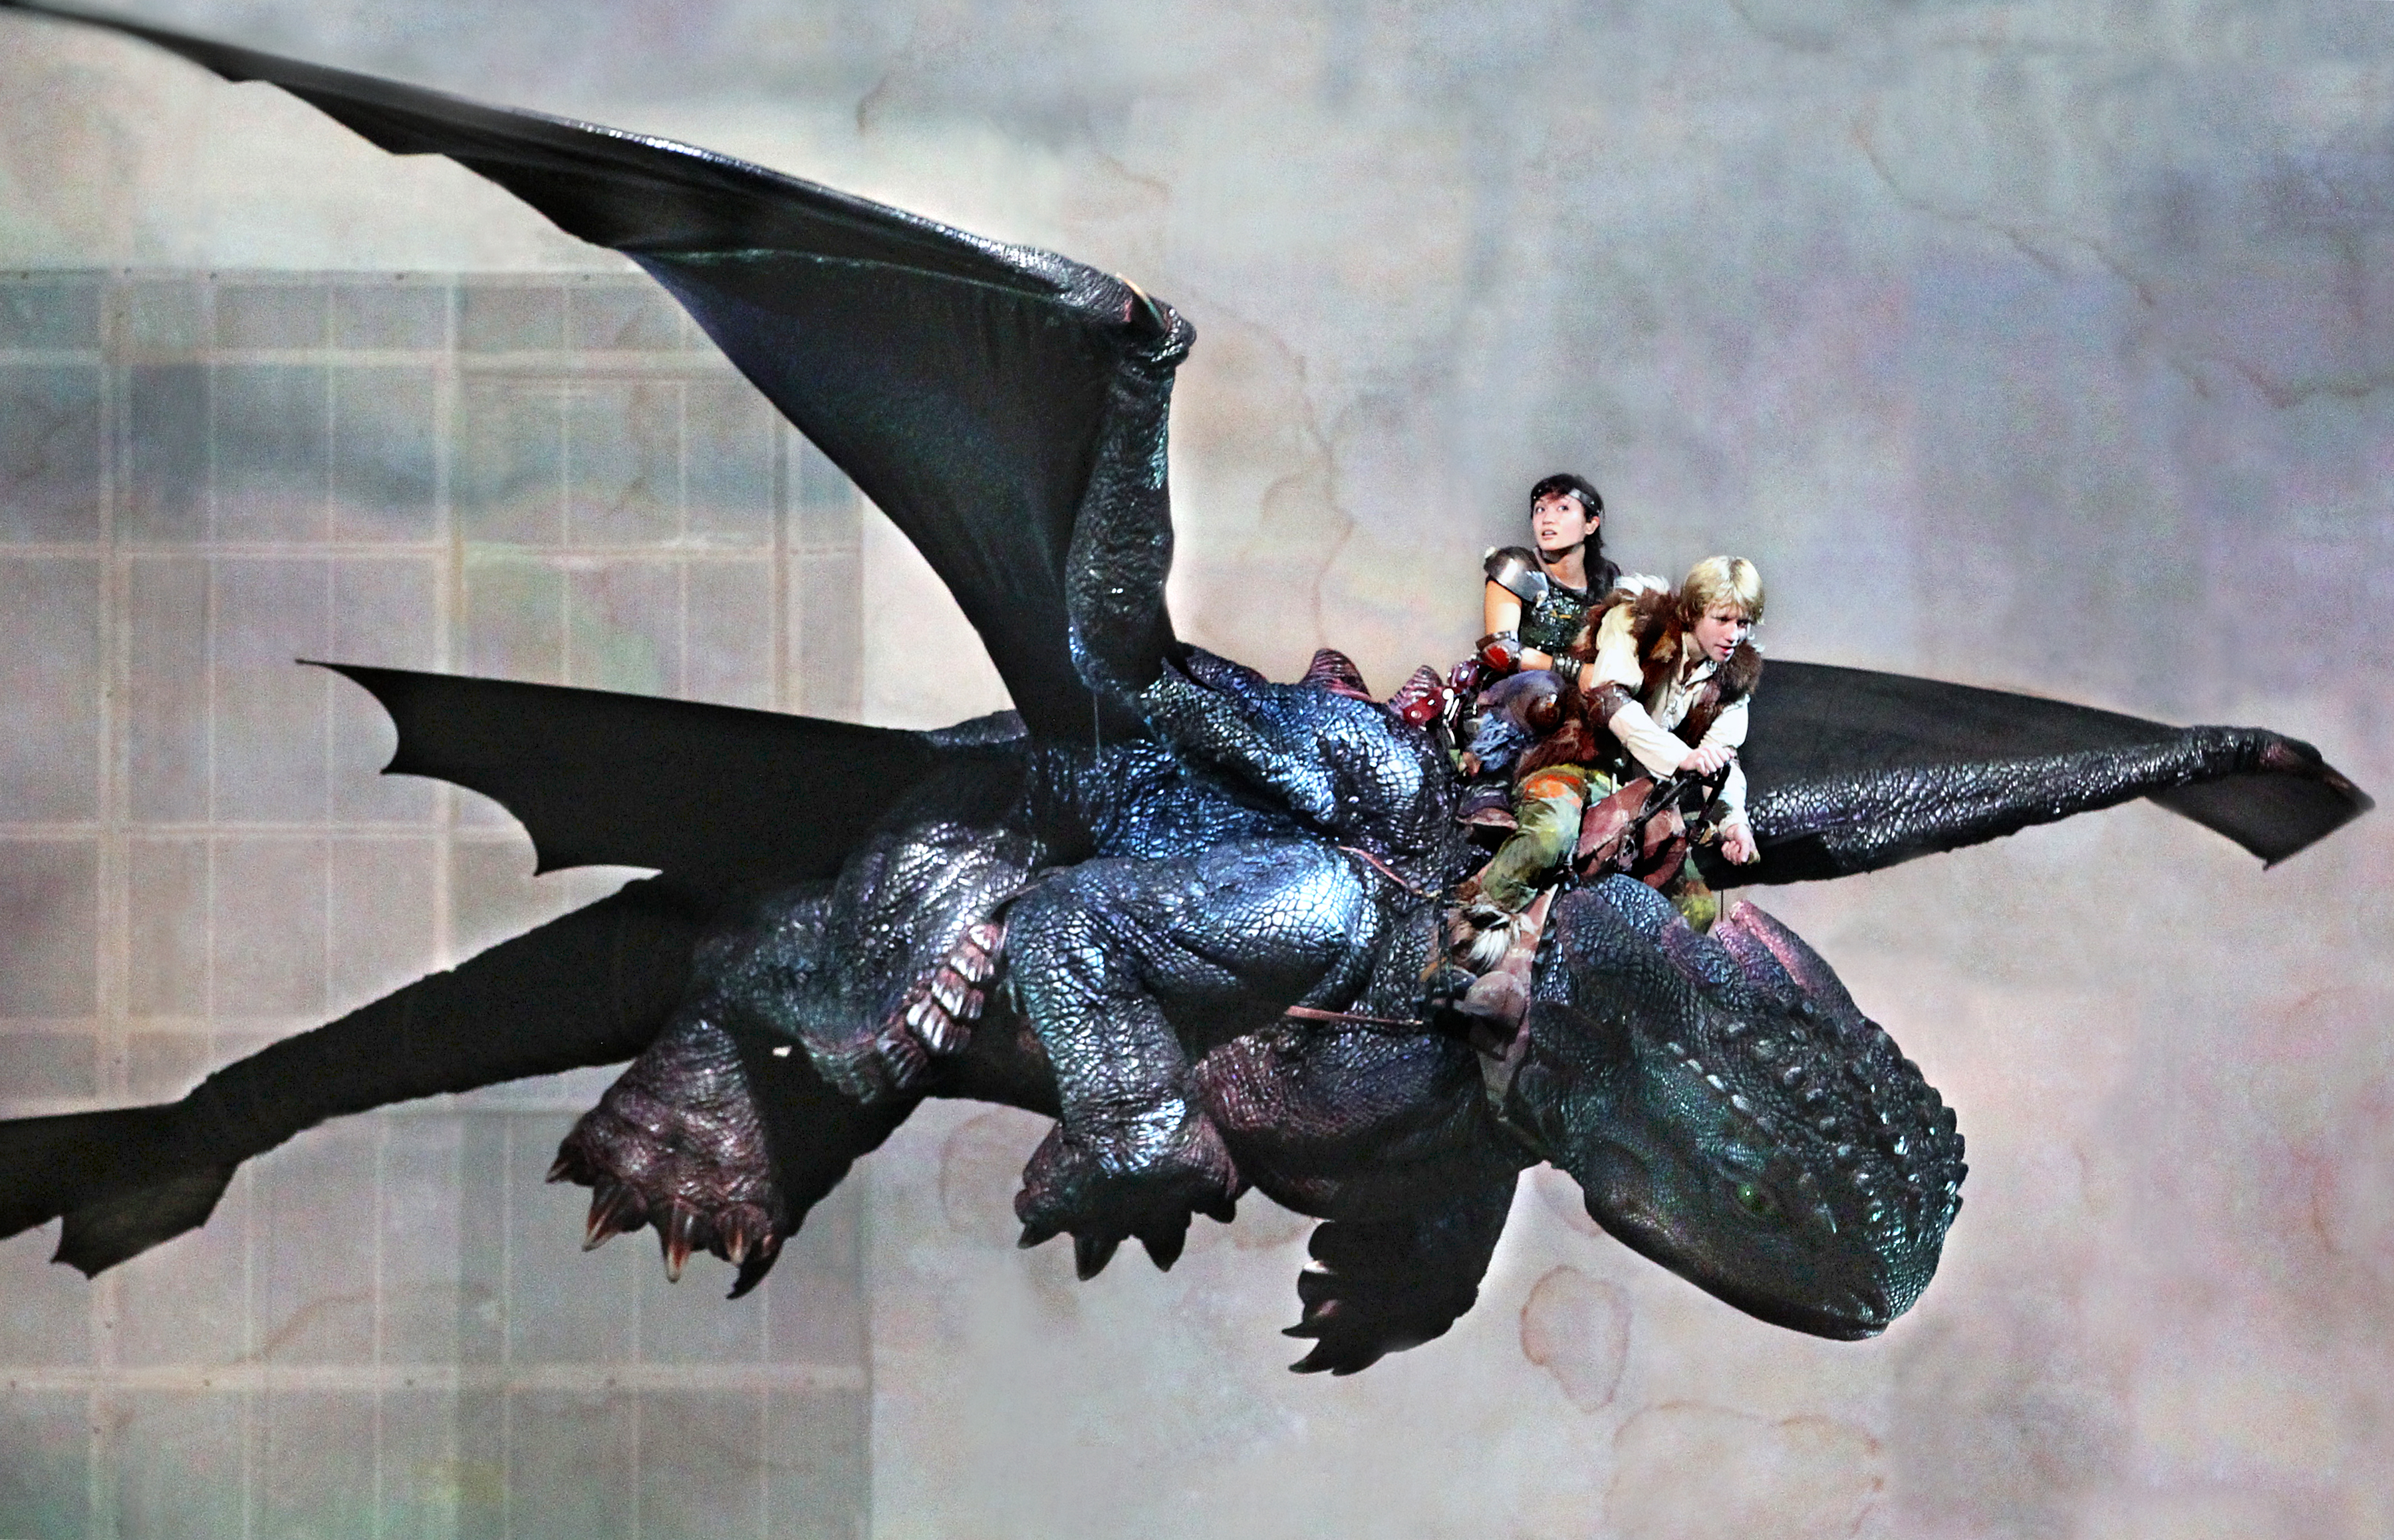 How to Train Your Dragon Live Spectacular Tour and 25.